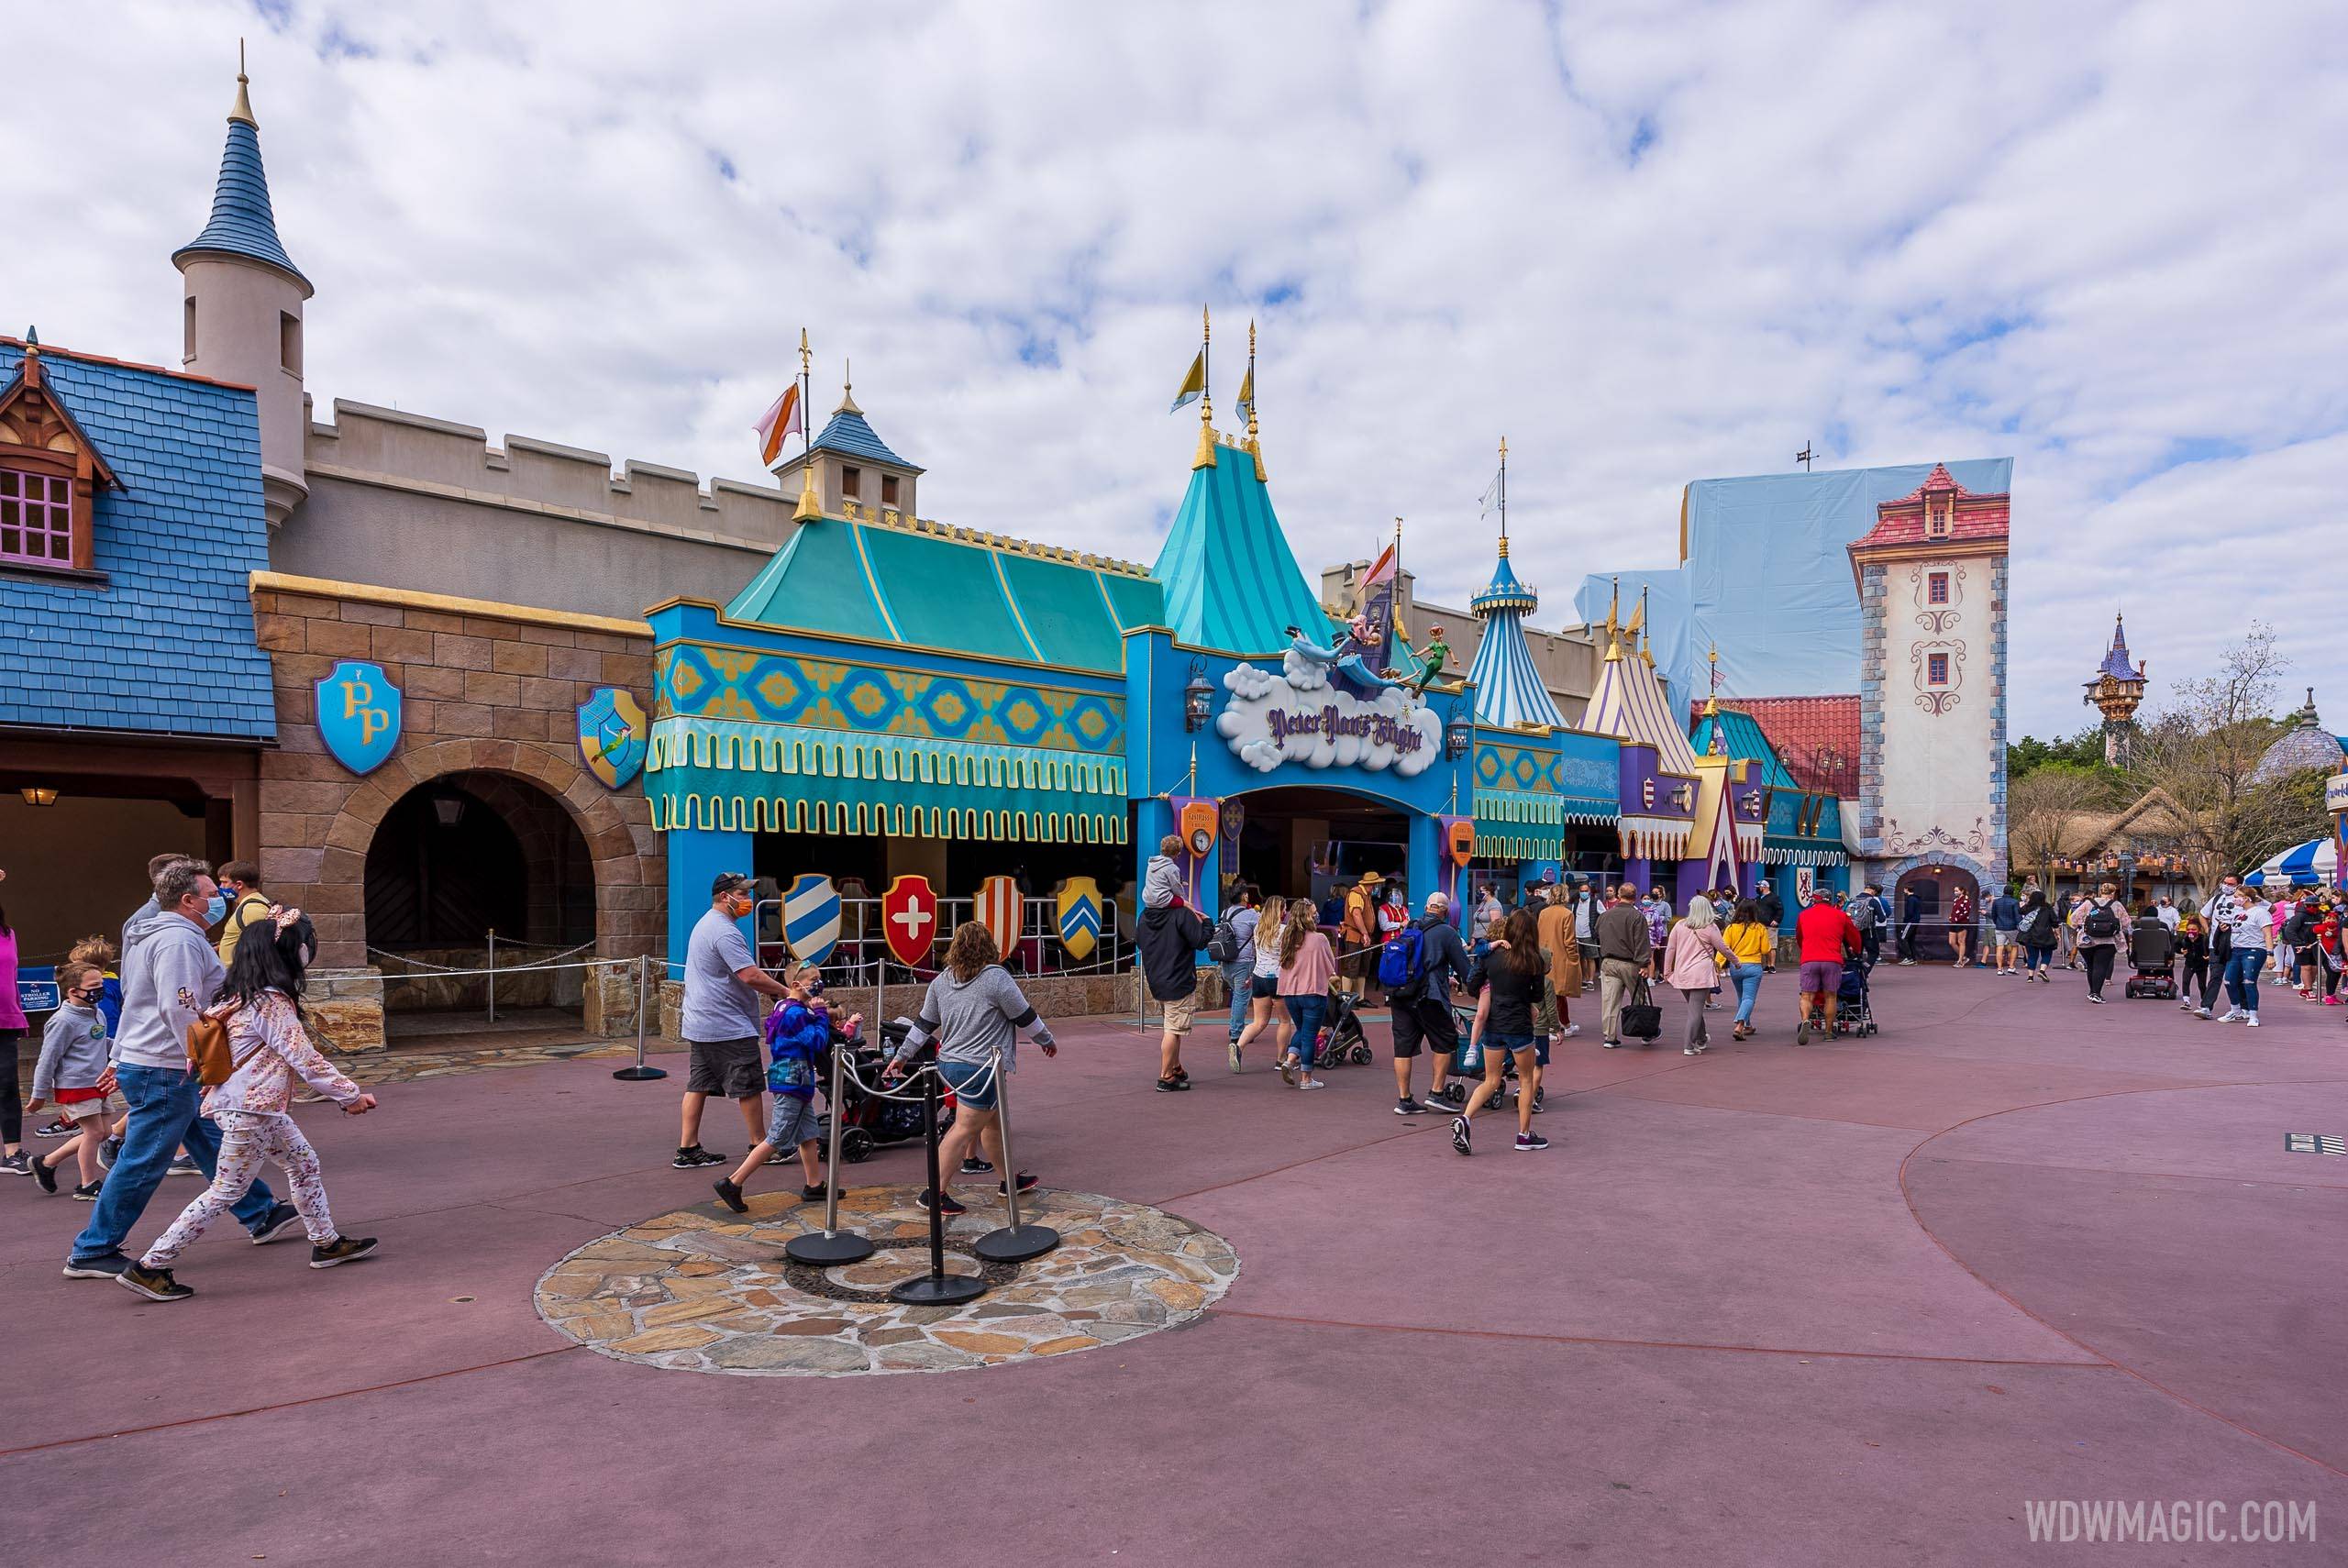 Peter Pan's Flight Closing, Replaced With New Up Ride